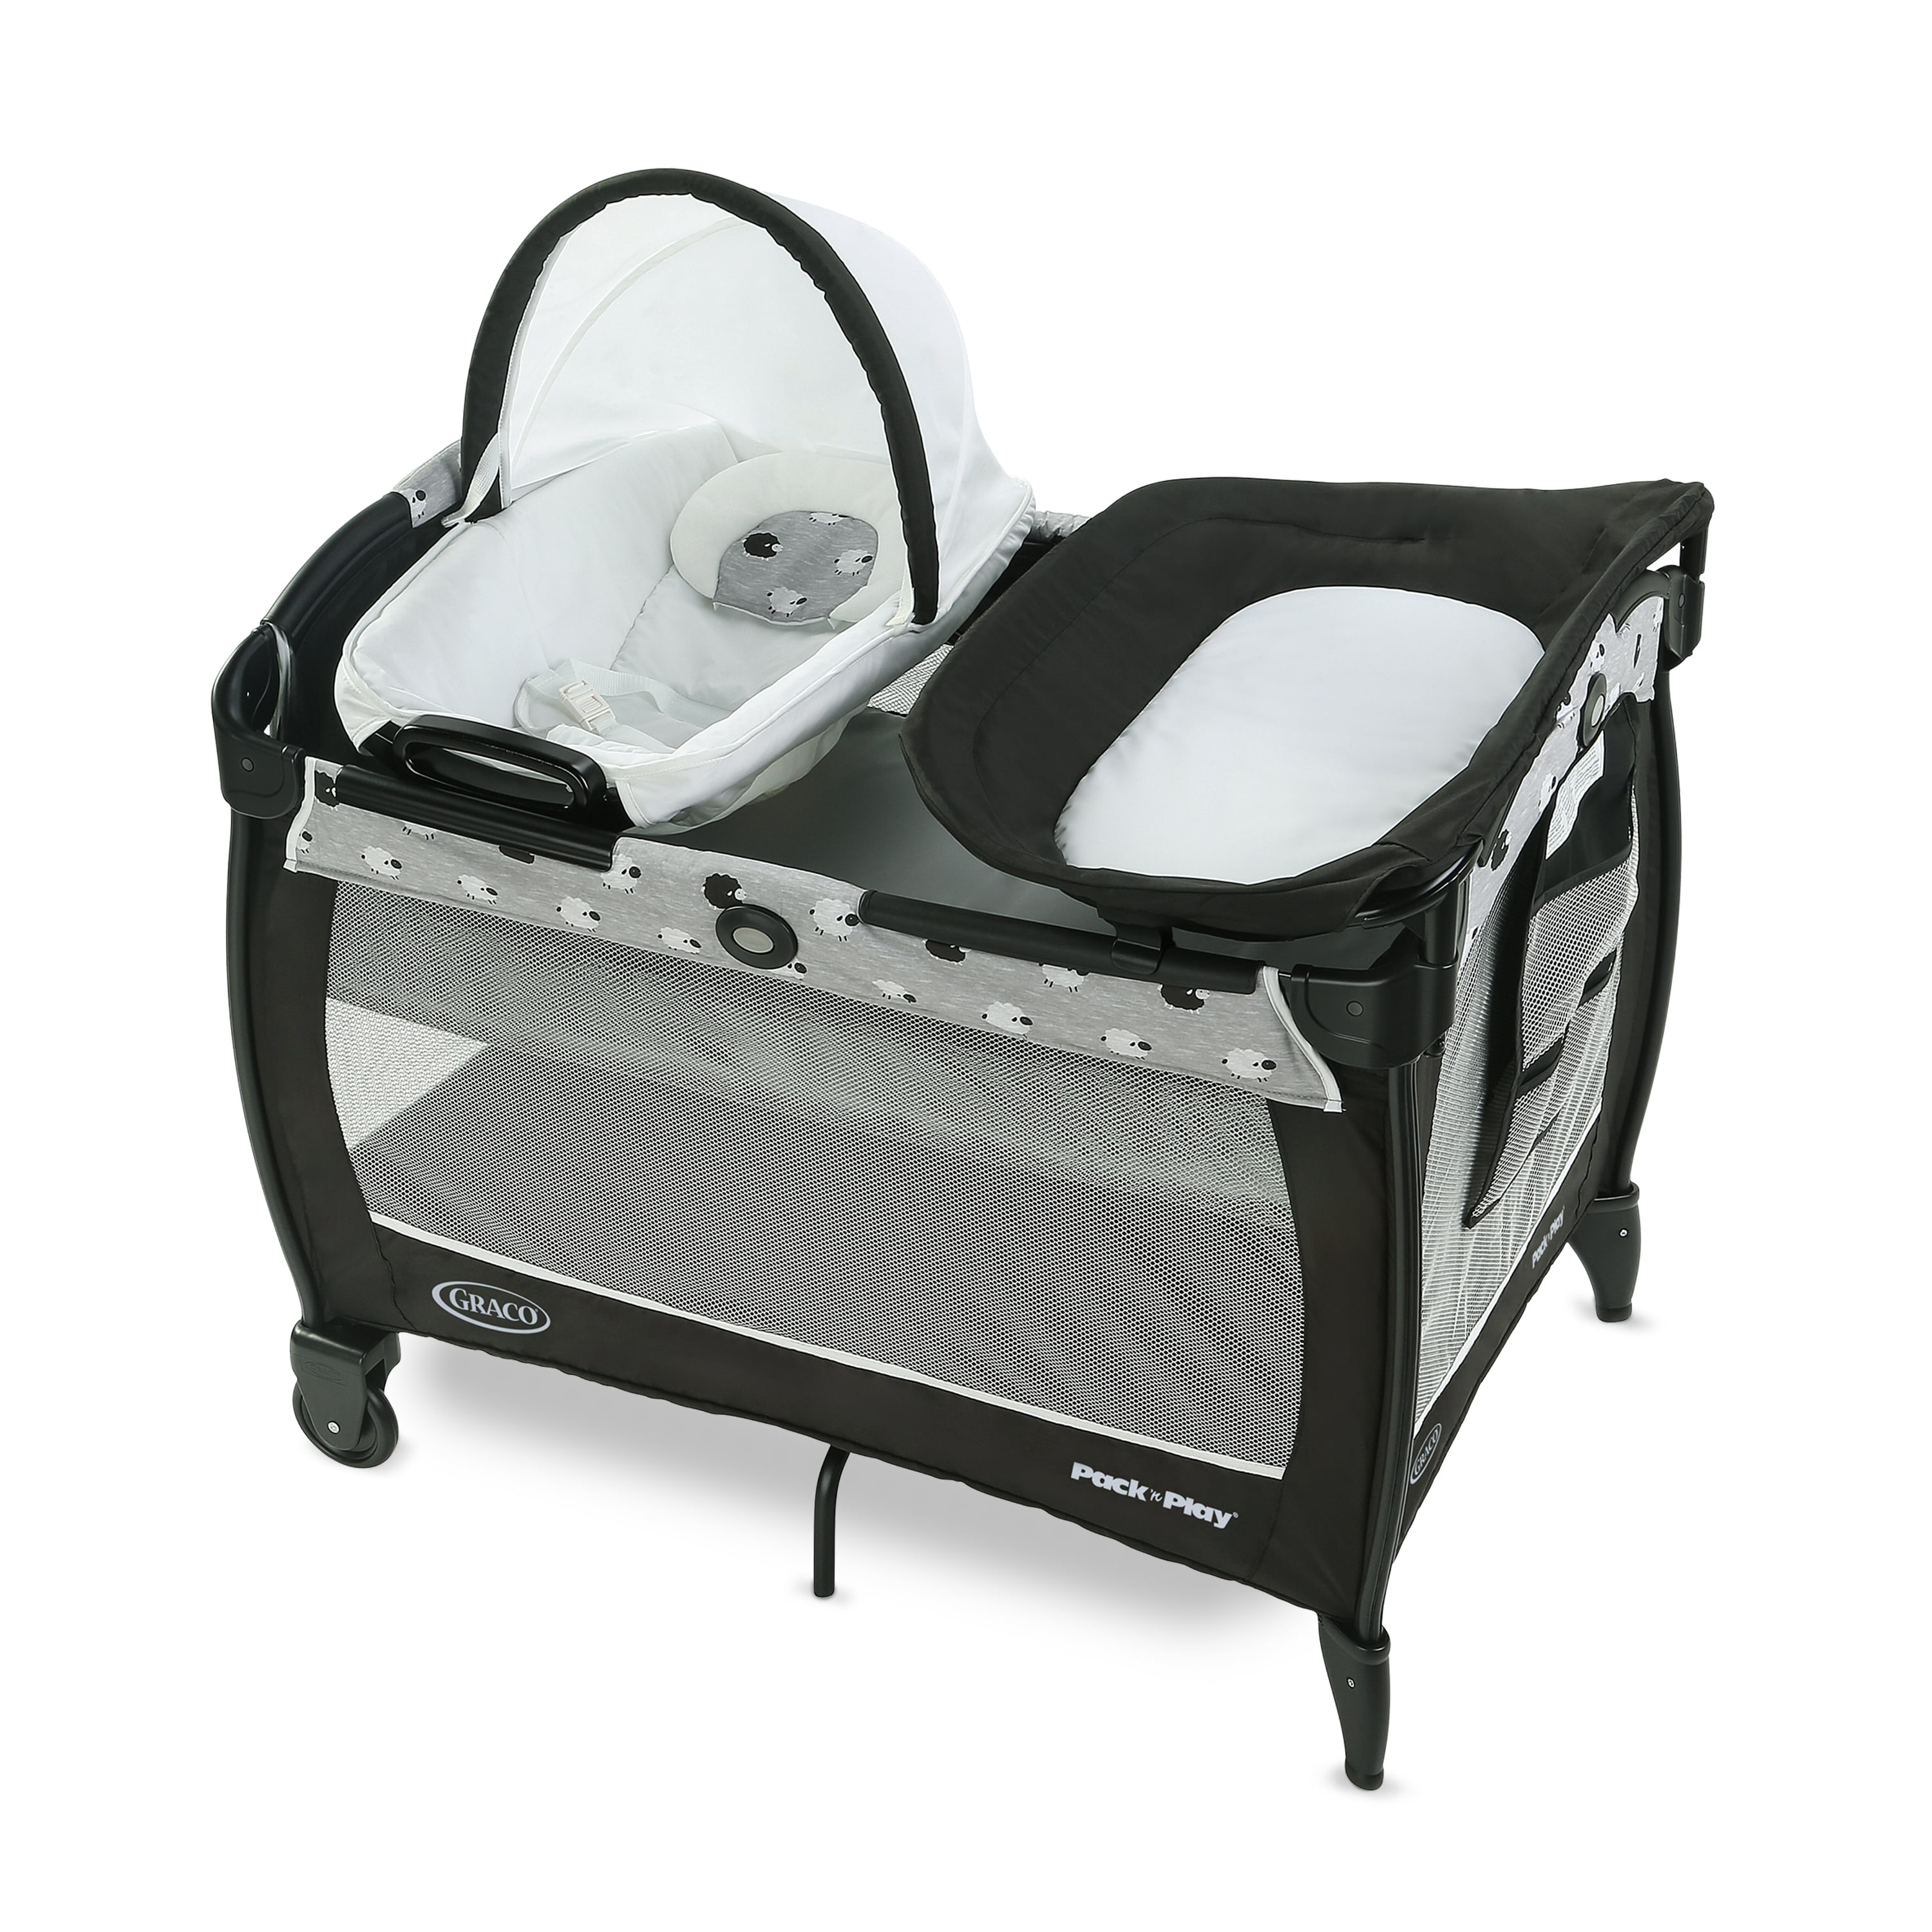 graco pack n play sheets canada